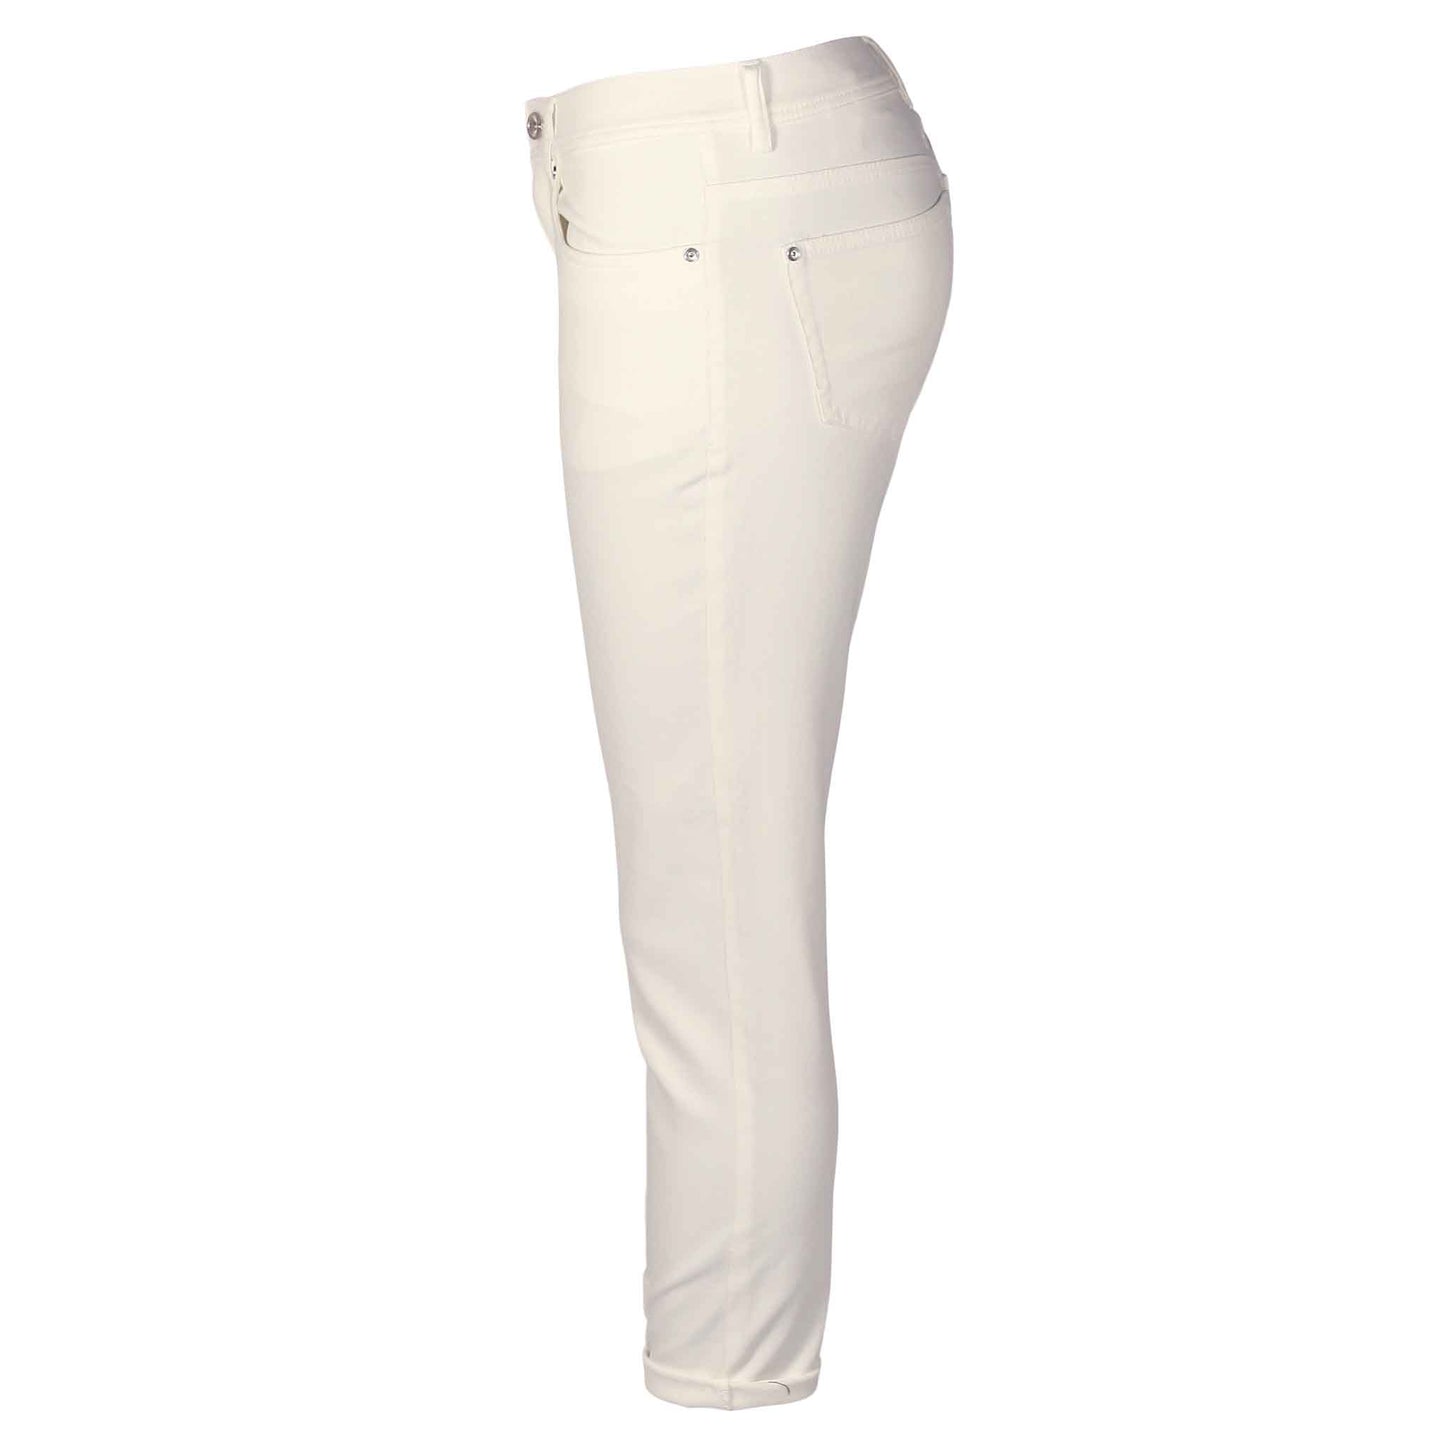 fashion tall woman bloomers jeans anni white